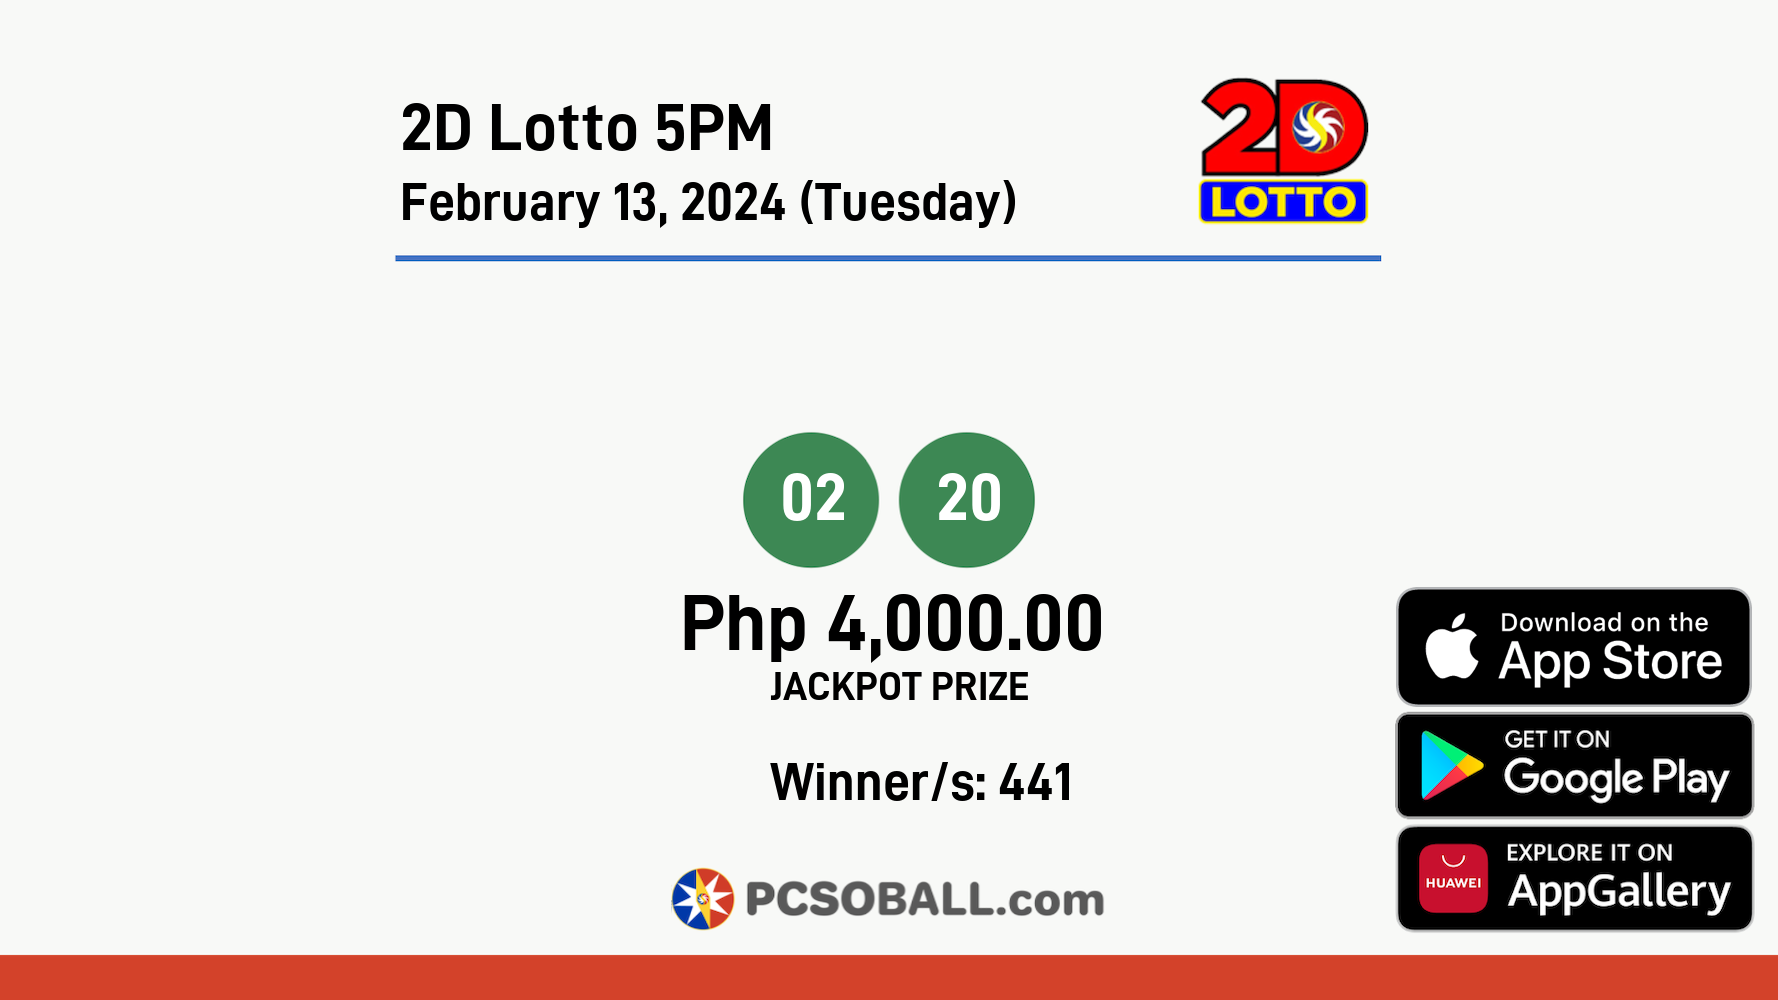 2D Lotto 5PM February 13, 2024 (Tuesday) Result